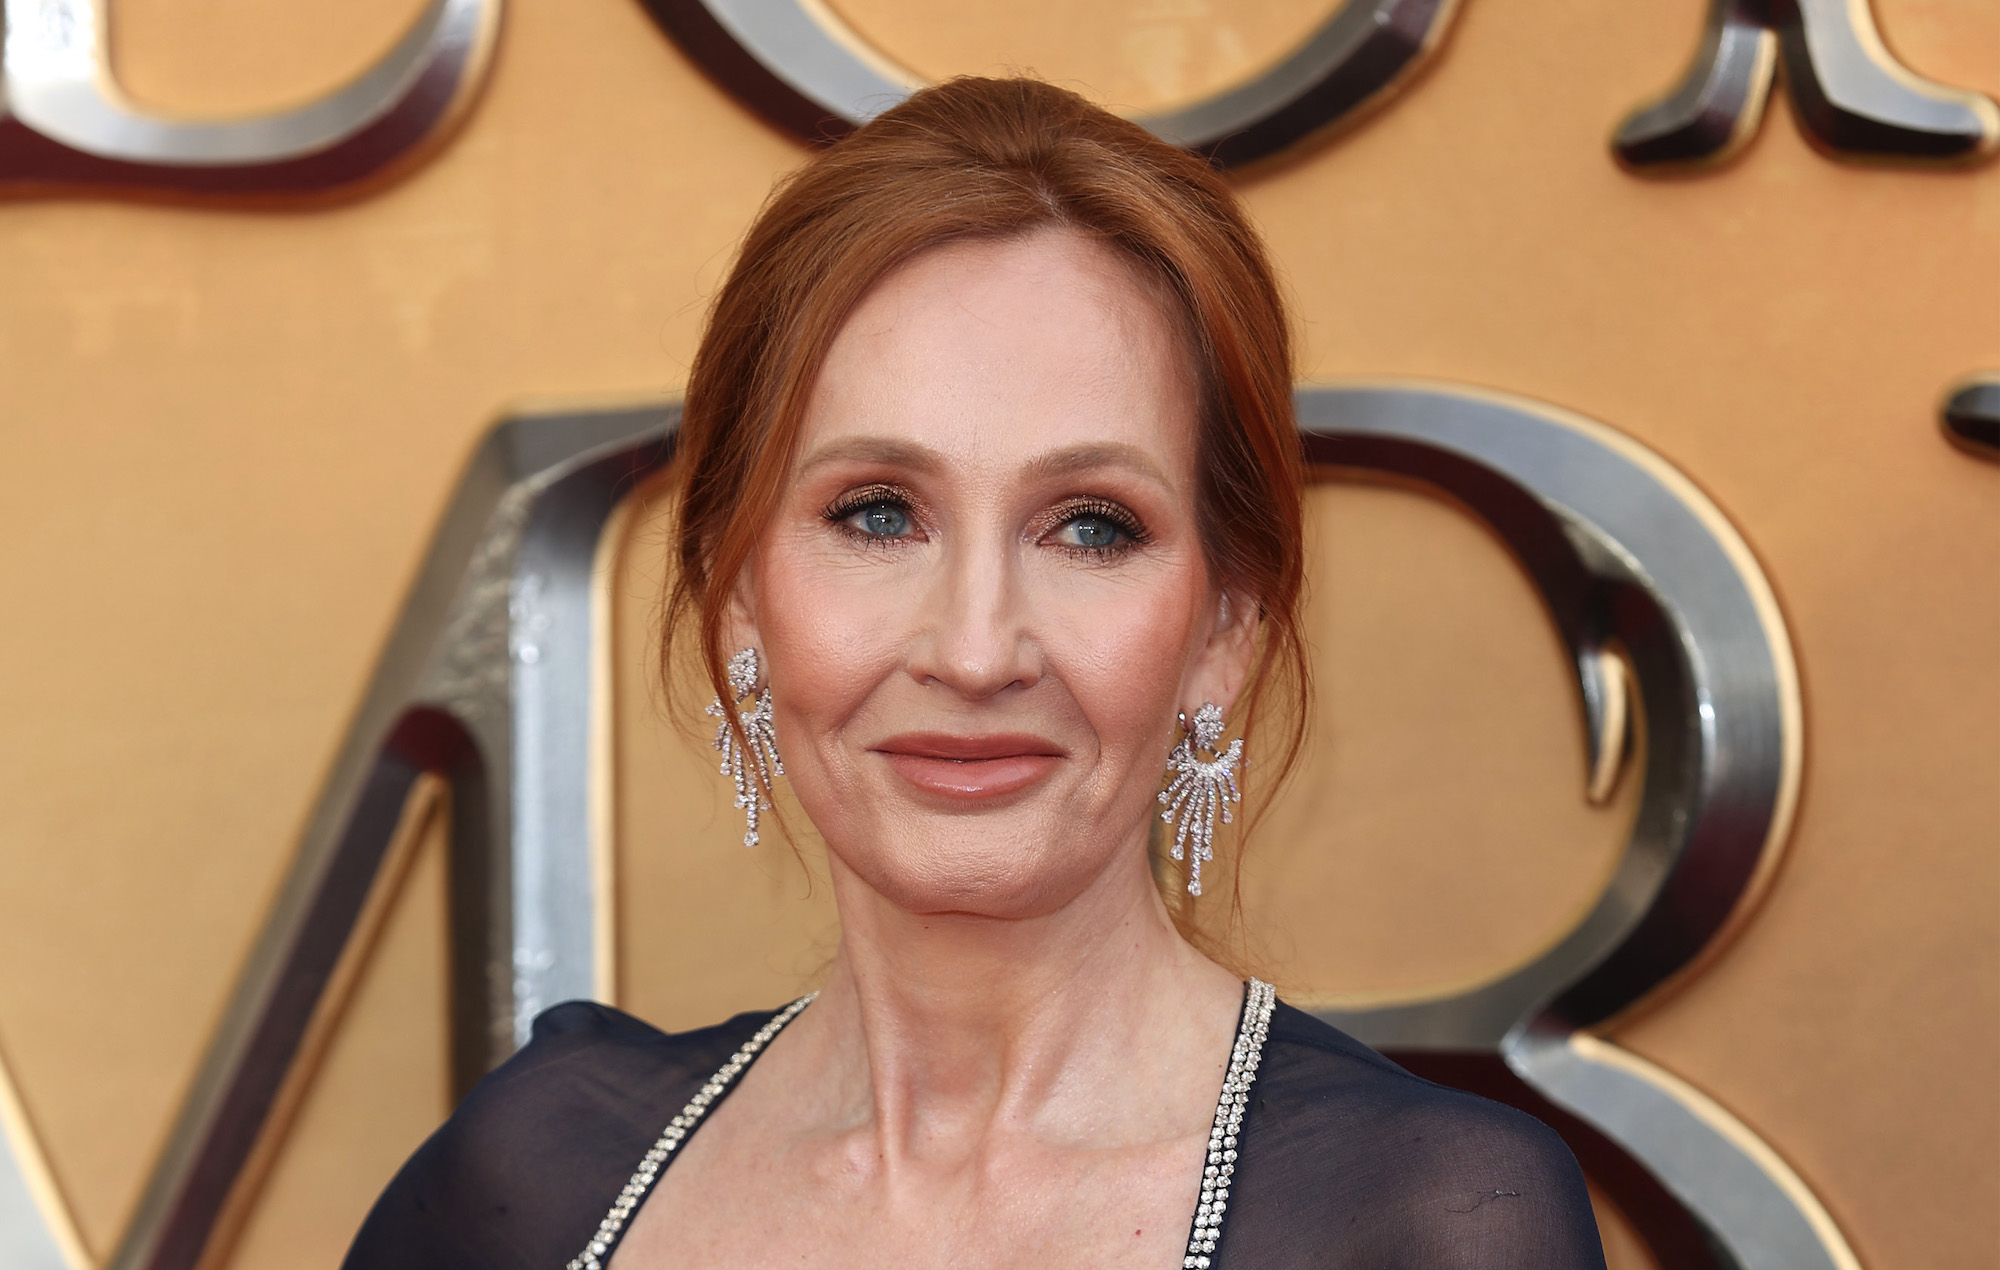 J.K. Rowling airbrushed from Museum of Pop Culture over “transphobic” views